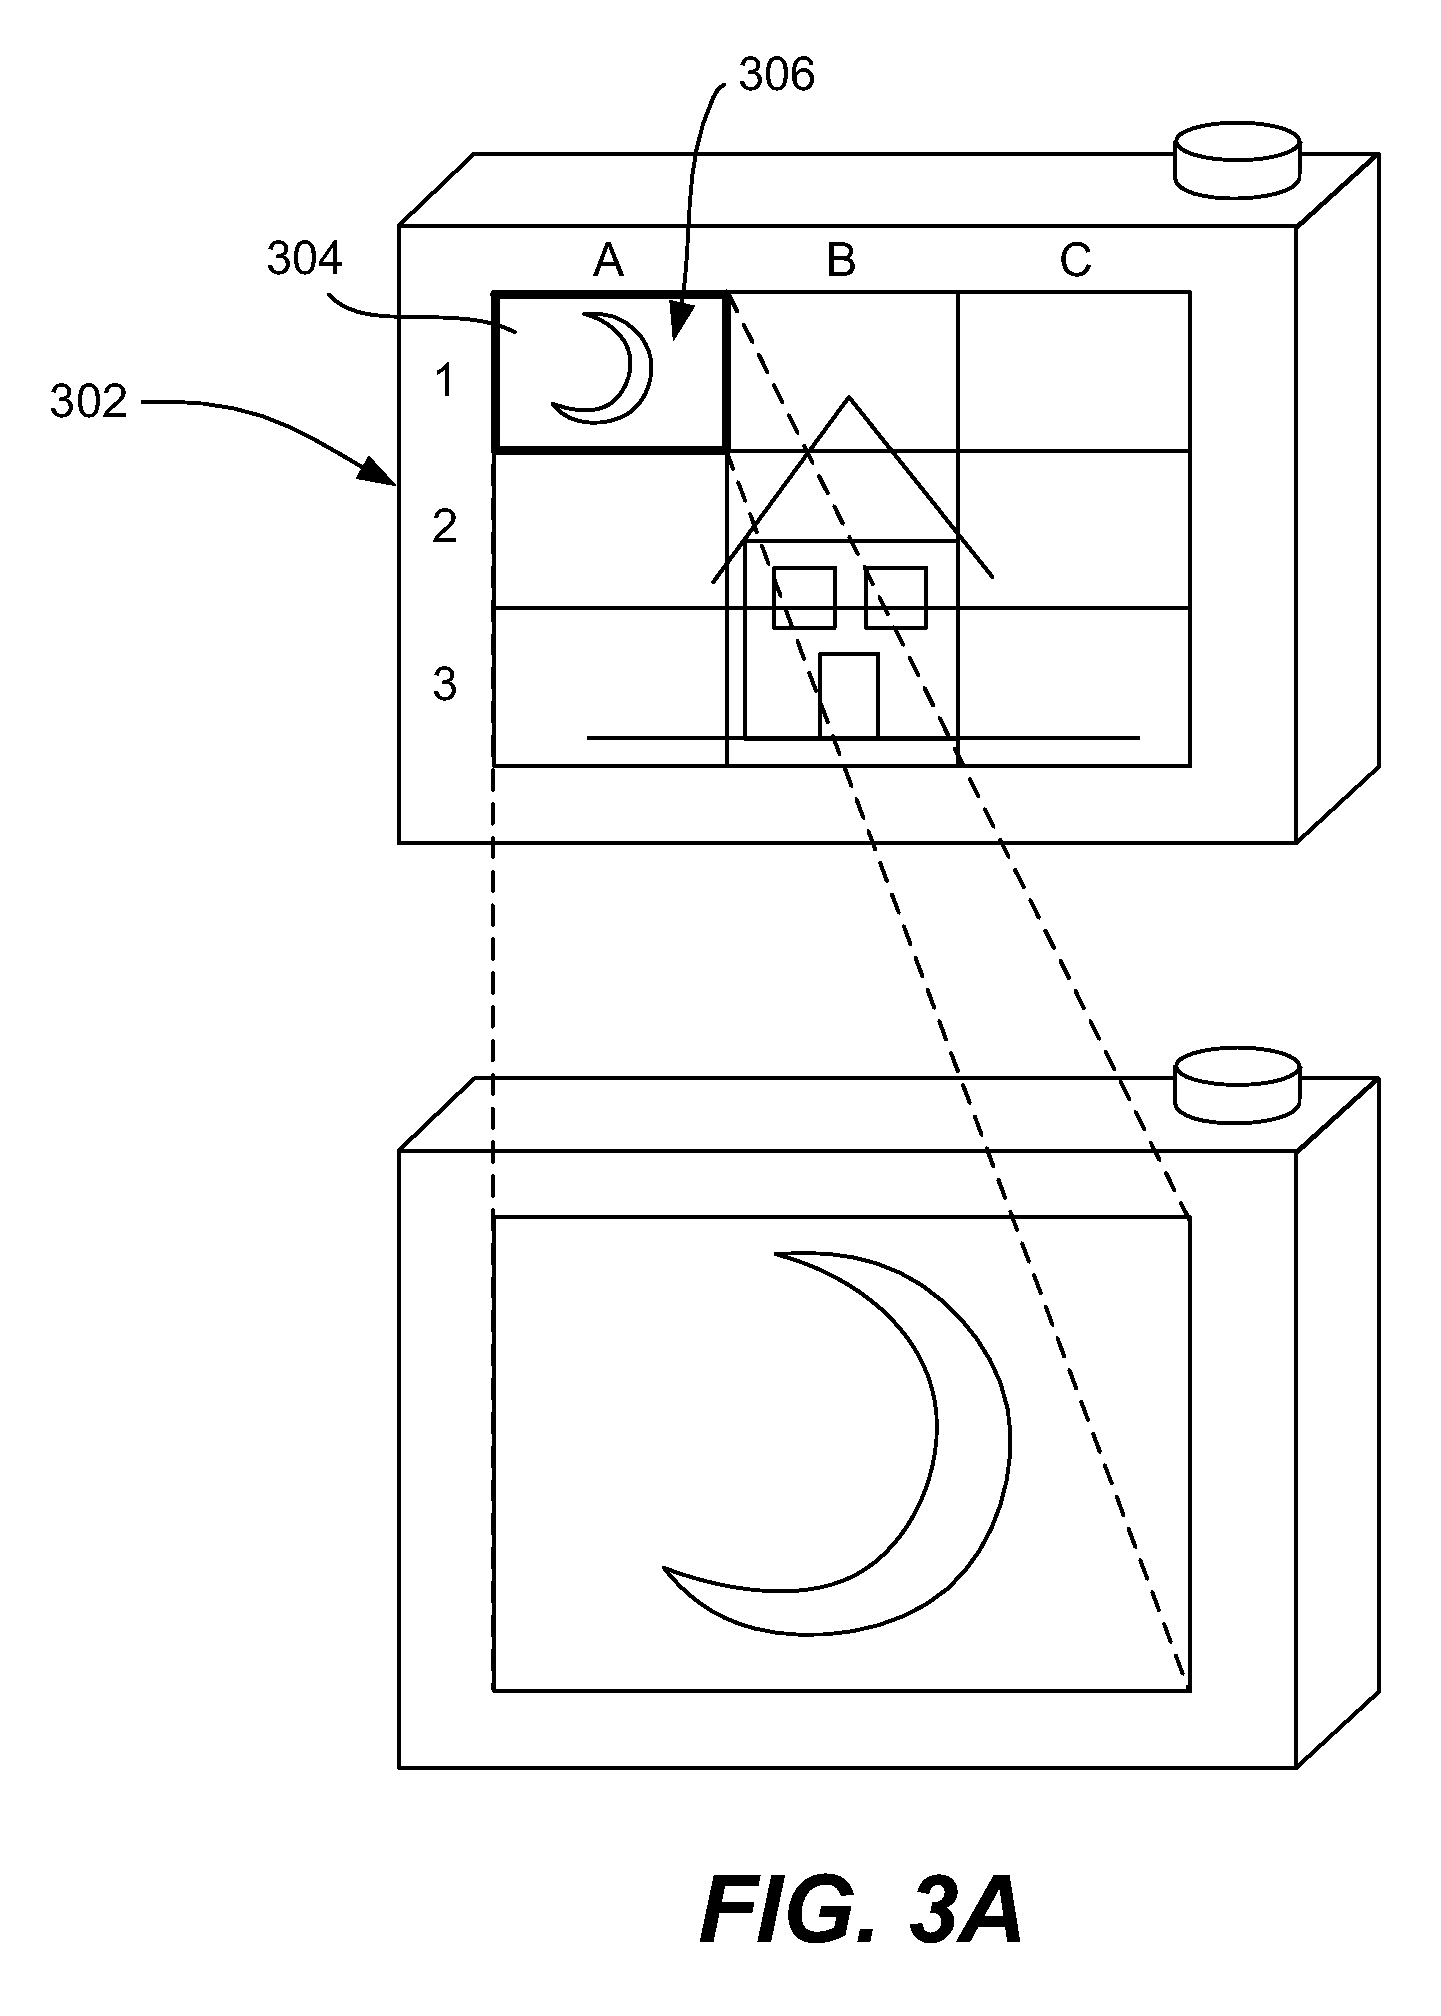 Image capturing device for high-resolution images and extended field-of-view images